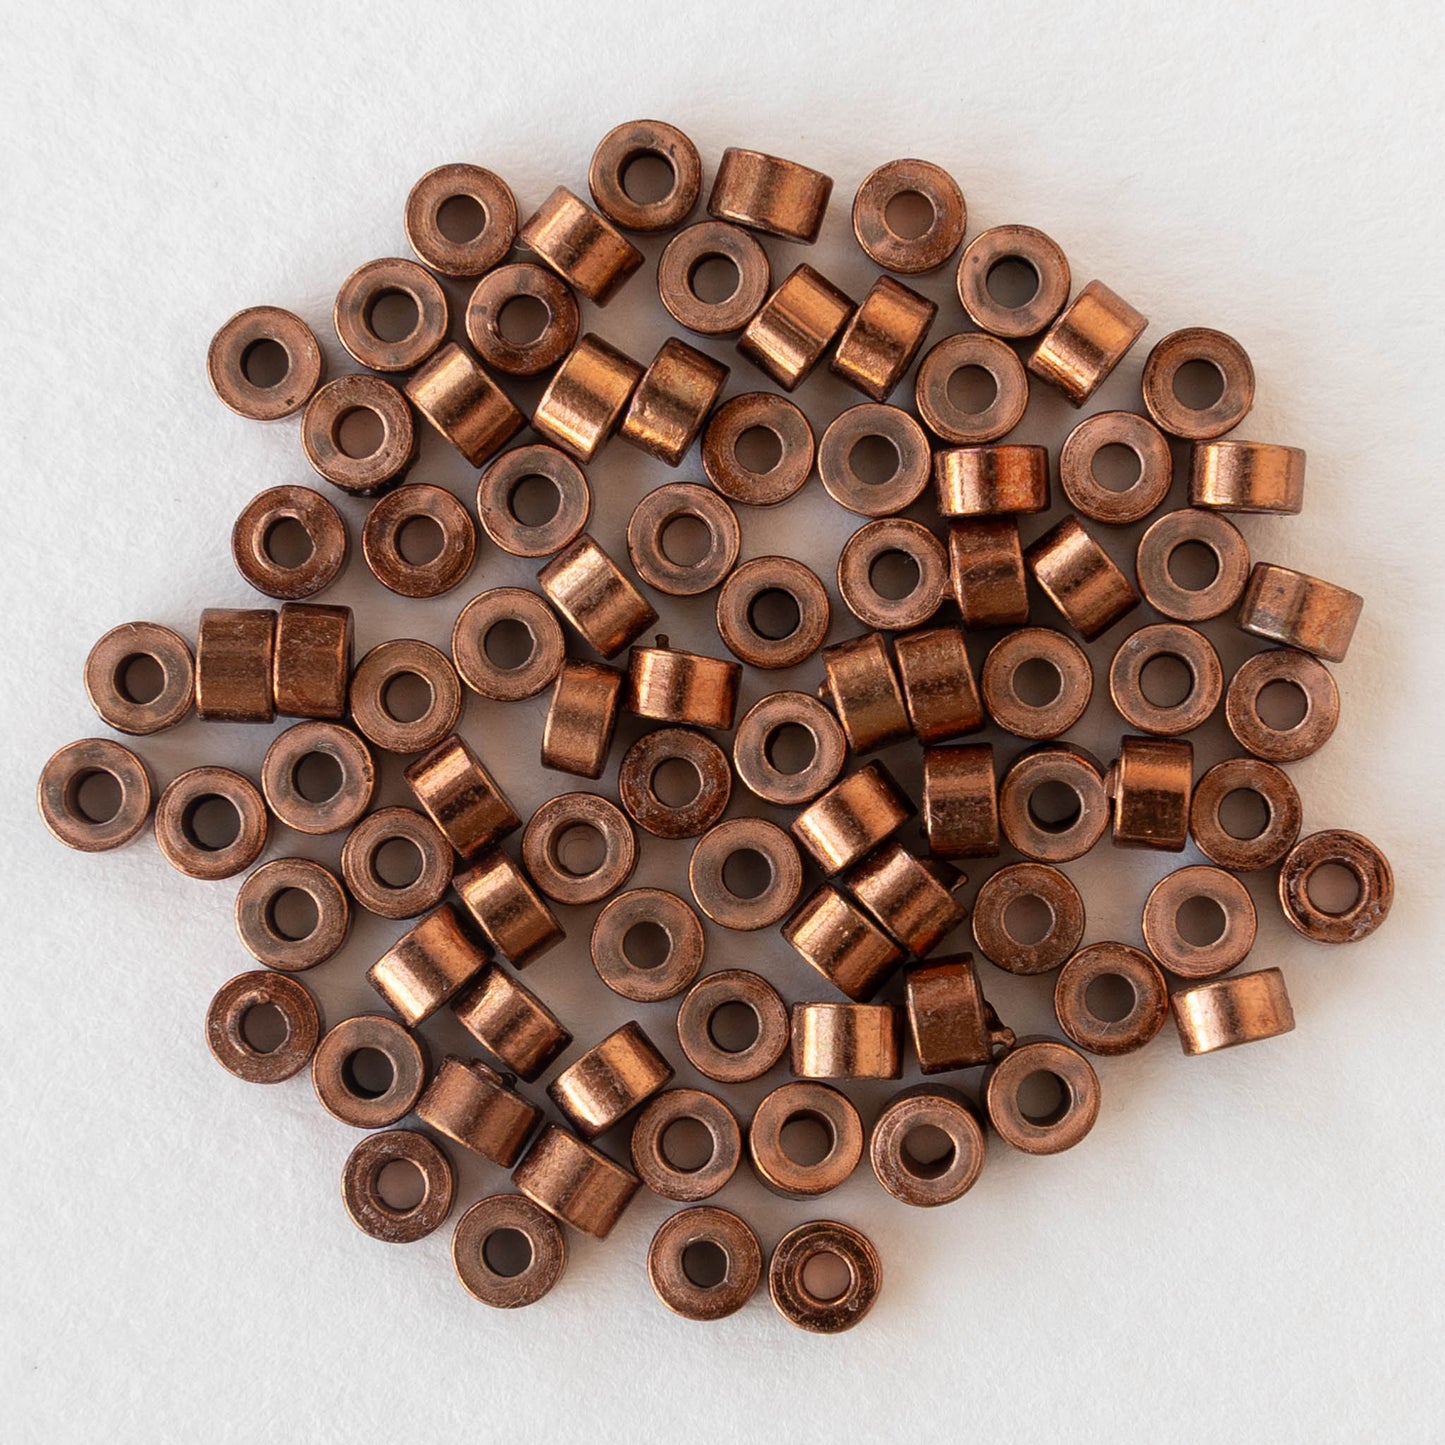 4mm Copper Plated Brass Tube Beads - 50